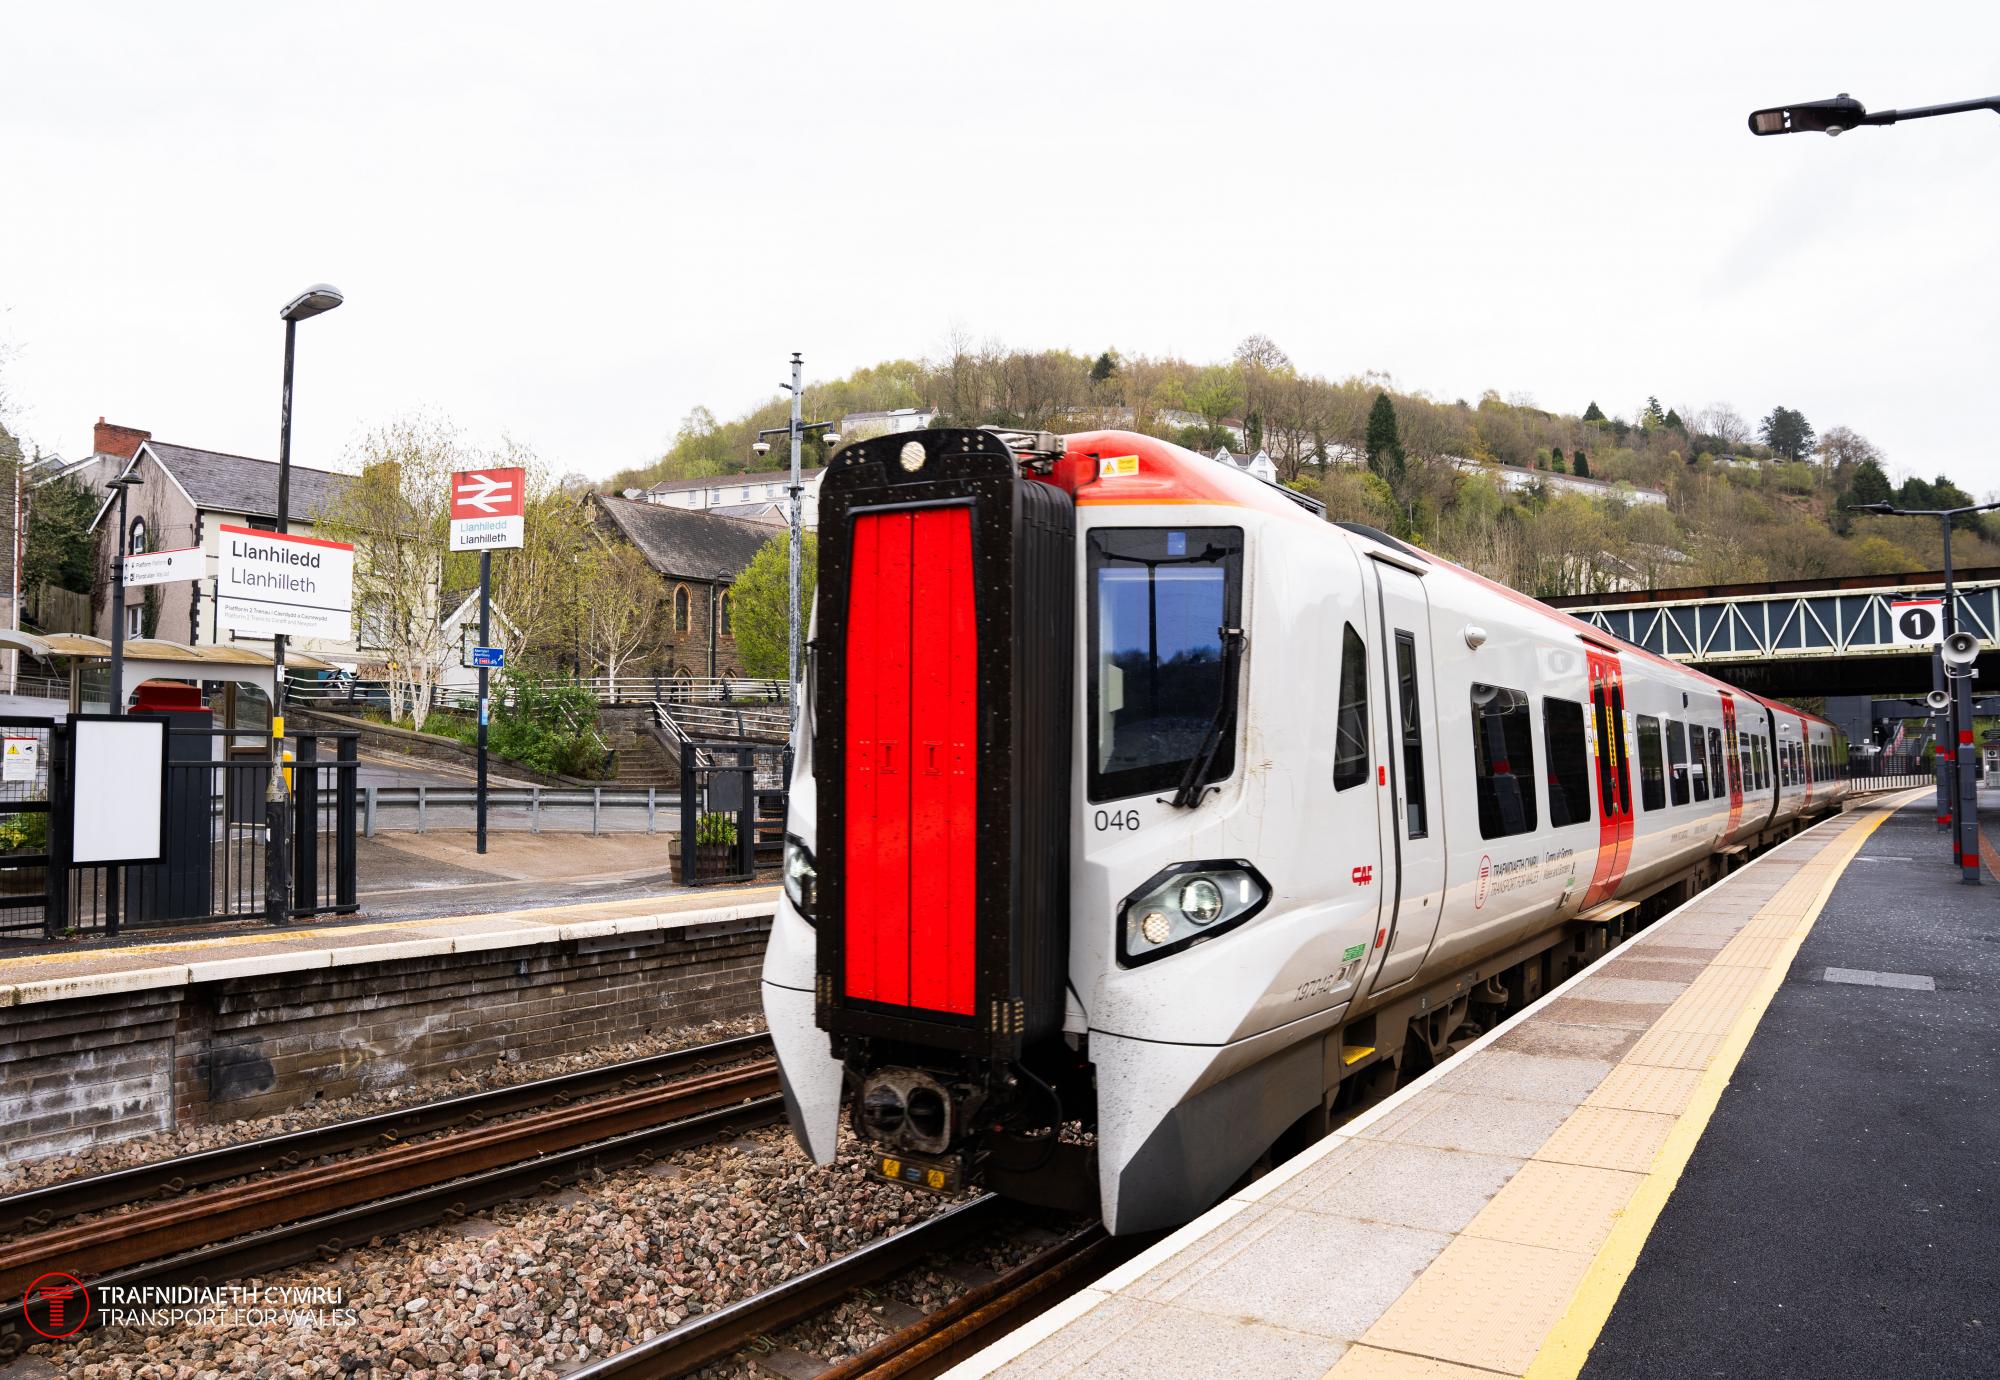 Class 197 train on the Ebbw Vale Line at Llanilleth